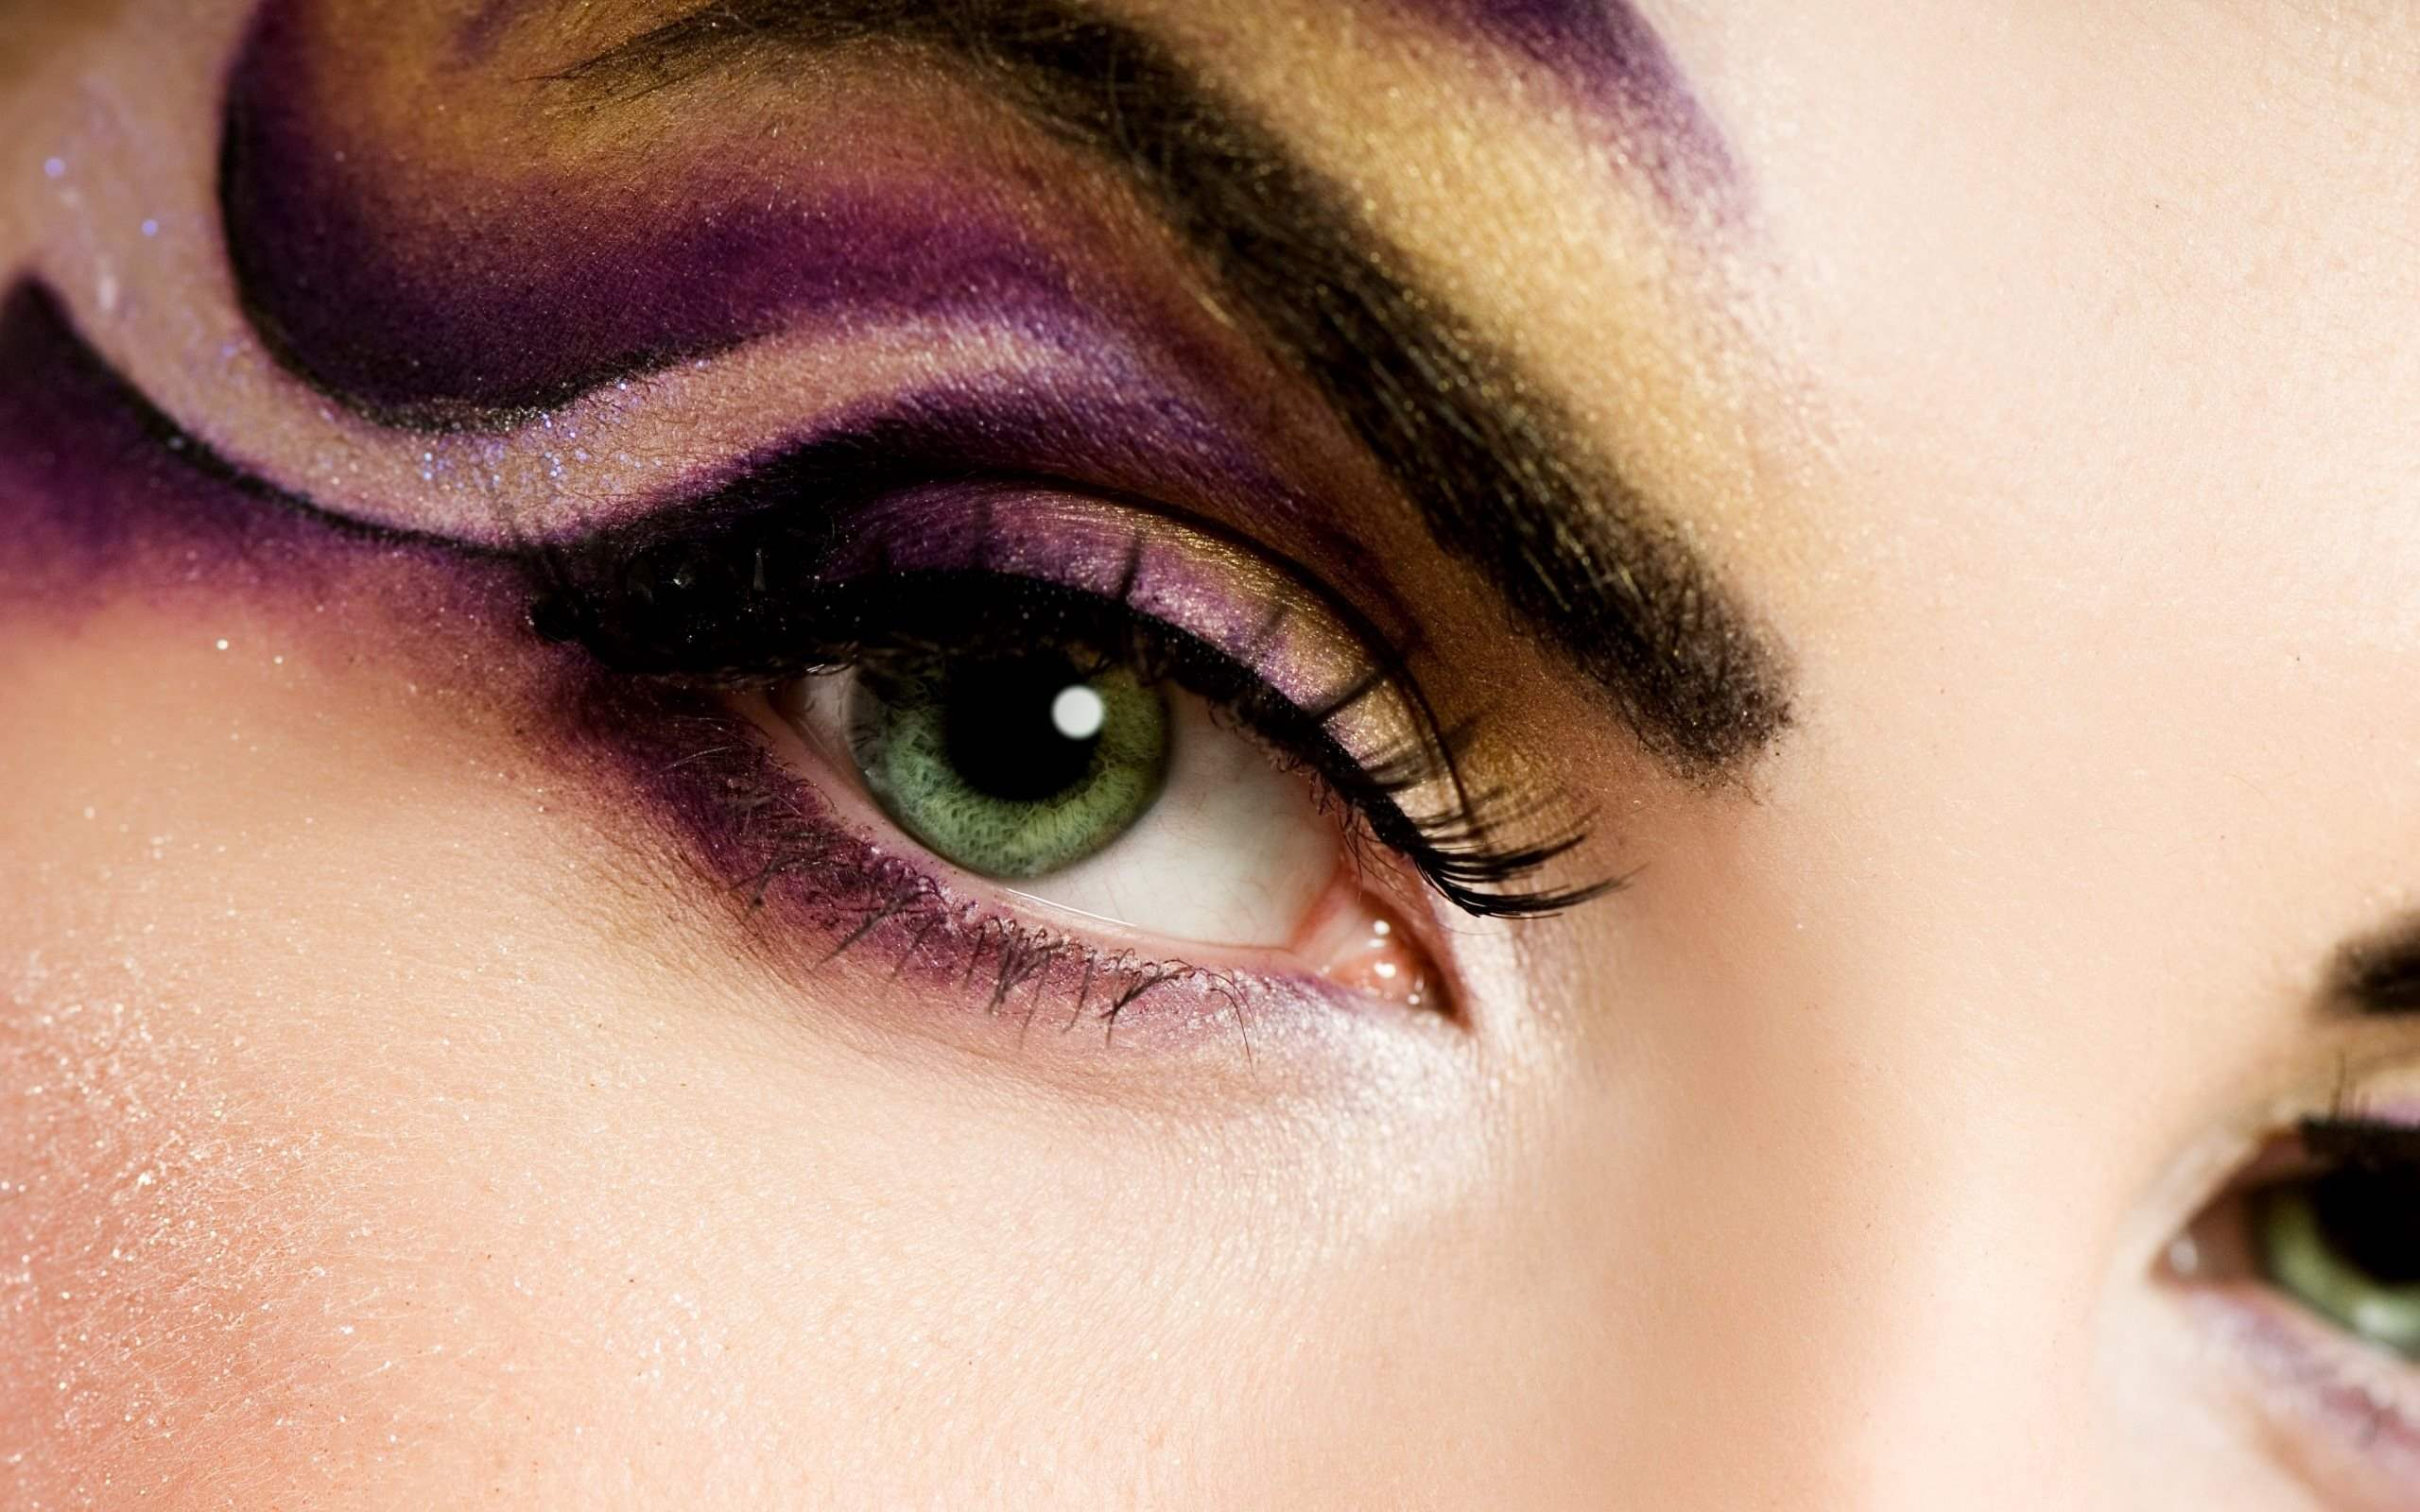 Design Of Eyes Makeup Creative Eye Makeup Looks And Design Ideas Page 3